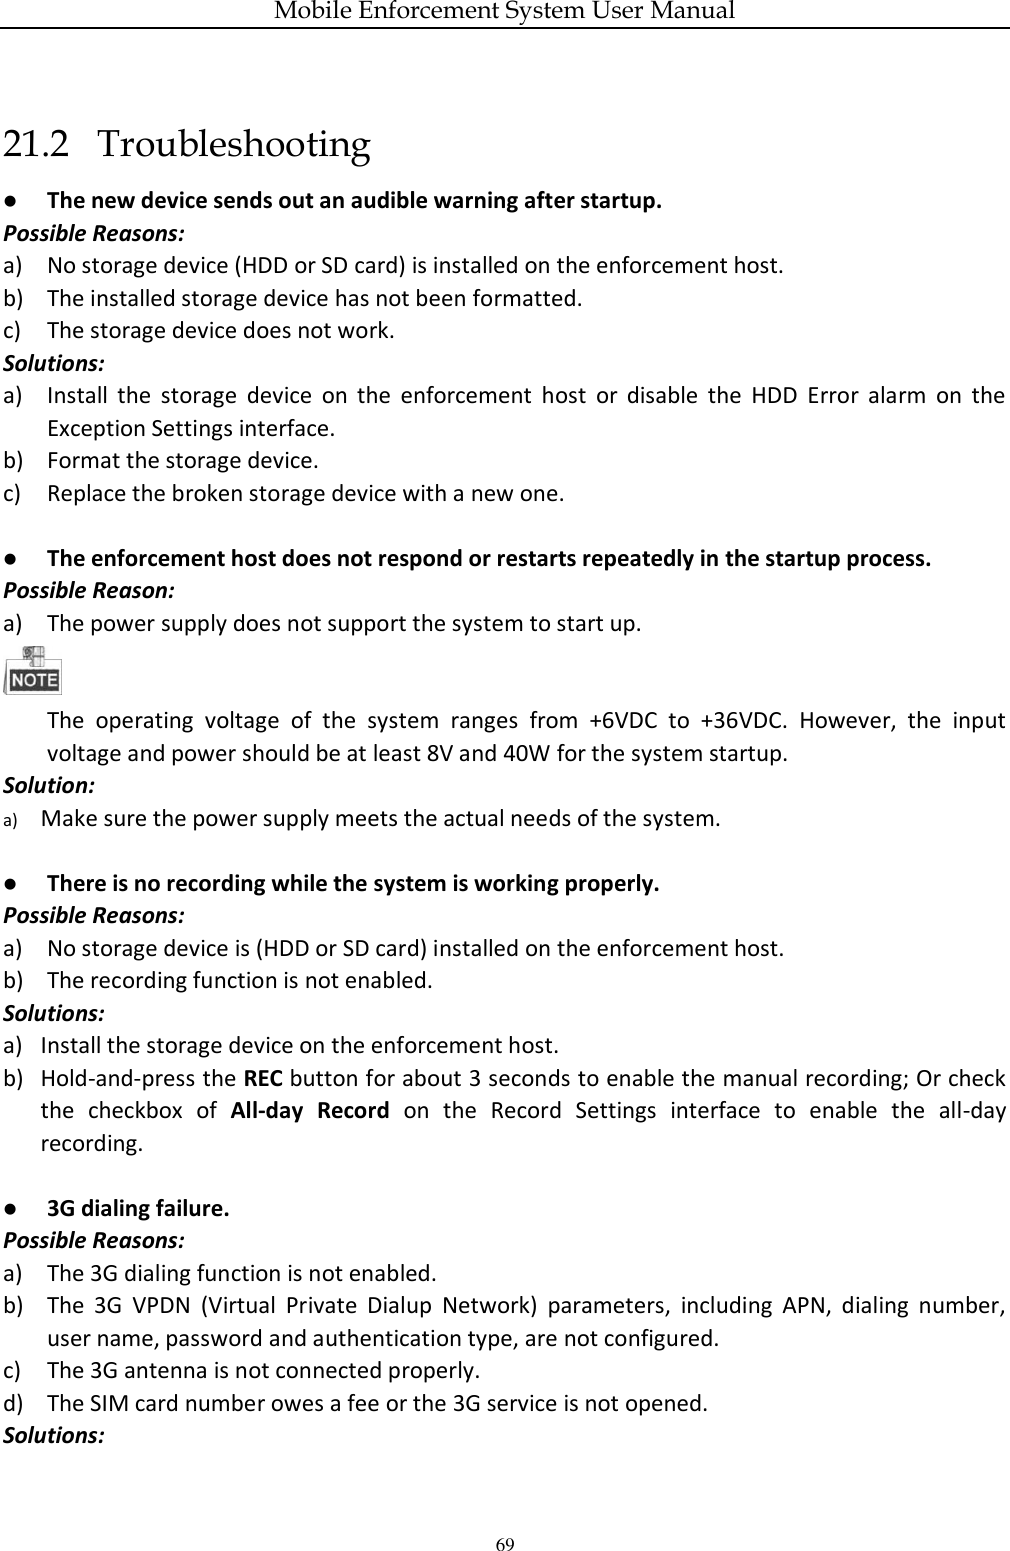 Mobile Enforcement System User Manual 69 21.2   Troubleshooting  The new device sends out an audible warning after startup. Possible Reasons: a) No storage device (HDD or SD card) is installed on the enforcement host. b) The installed storage device has not been formatted. c) The storage device does not work. Solutions: a) Install  the  storage  device  on  the  enforcement  host  or  disable  the  HDD  Error  alarm  on  the Exception Settings interface. b) Format the storage device. c) Replace the broken storage device with a new one.   The enforcement host does not respond or restarts repeatedly in the startup process. Possible Reason: a) The power supply does not support the system to start up.  The  operating  voltage  of  the  system  ranges  from  +6VDC  to  +36VDC.  However,  the  input voltage and power should be at least 8V and 40W for the system startup. Solution: a) Make sure the power supply meets the actual needs of the system.   There is no recording while the system is working properly. Possible Reasons: a) No storage device is (HDD or SD card) installed on the enforcement host. b) The recording function is not enabled. Solutions: a) Install the storage device on the enforcement host. b) Hold-and-press the REC button for about 3 seconds to enable the manual recording; Or check the  checkbox  of  All-day  Record  on  the  Record  Settings  interface  to  enable  the  all-day recording.   3G dialing failure. Possible Reasons: a) The 3G dialing function is not enabled. b) The  3G  VPDN  (Virtual  Private  Dialup  Network)  parameters,  including  APN,  dialing  number, user name, password and authentication type, are not configured. c) The 3G antenna is not connected properly. d) The SIM card number owes a fee or the 3G service is not opened. Solutions: 